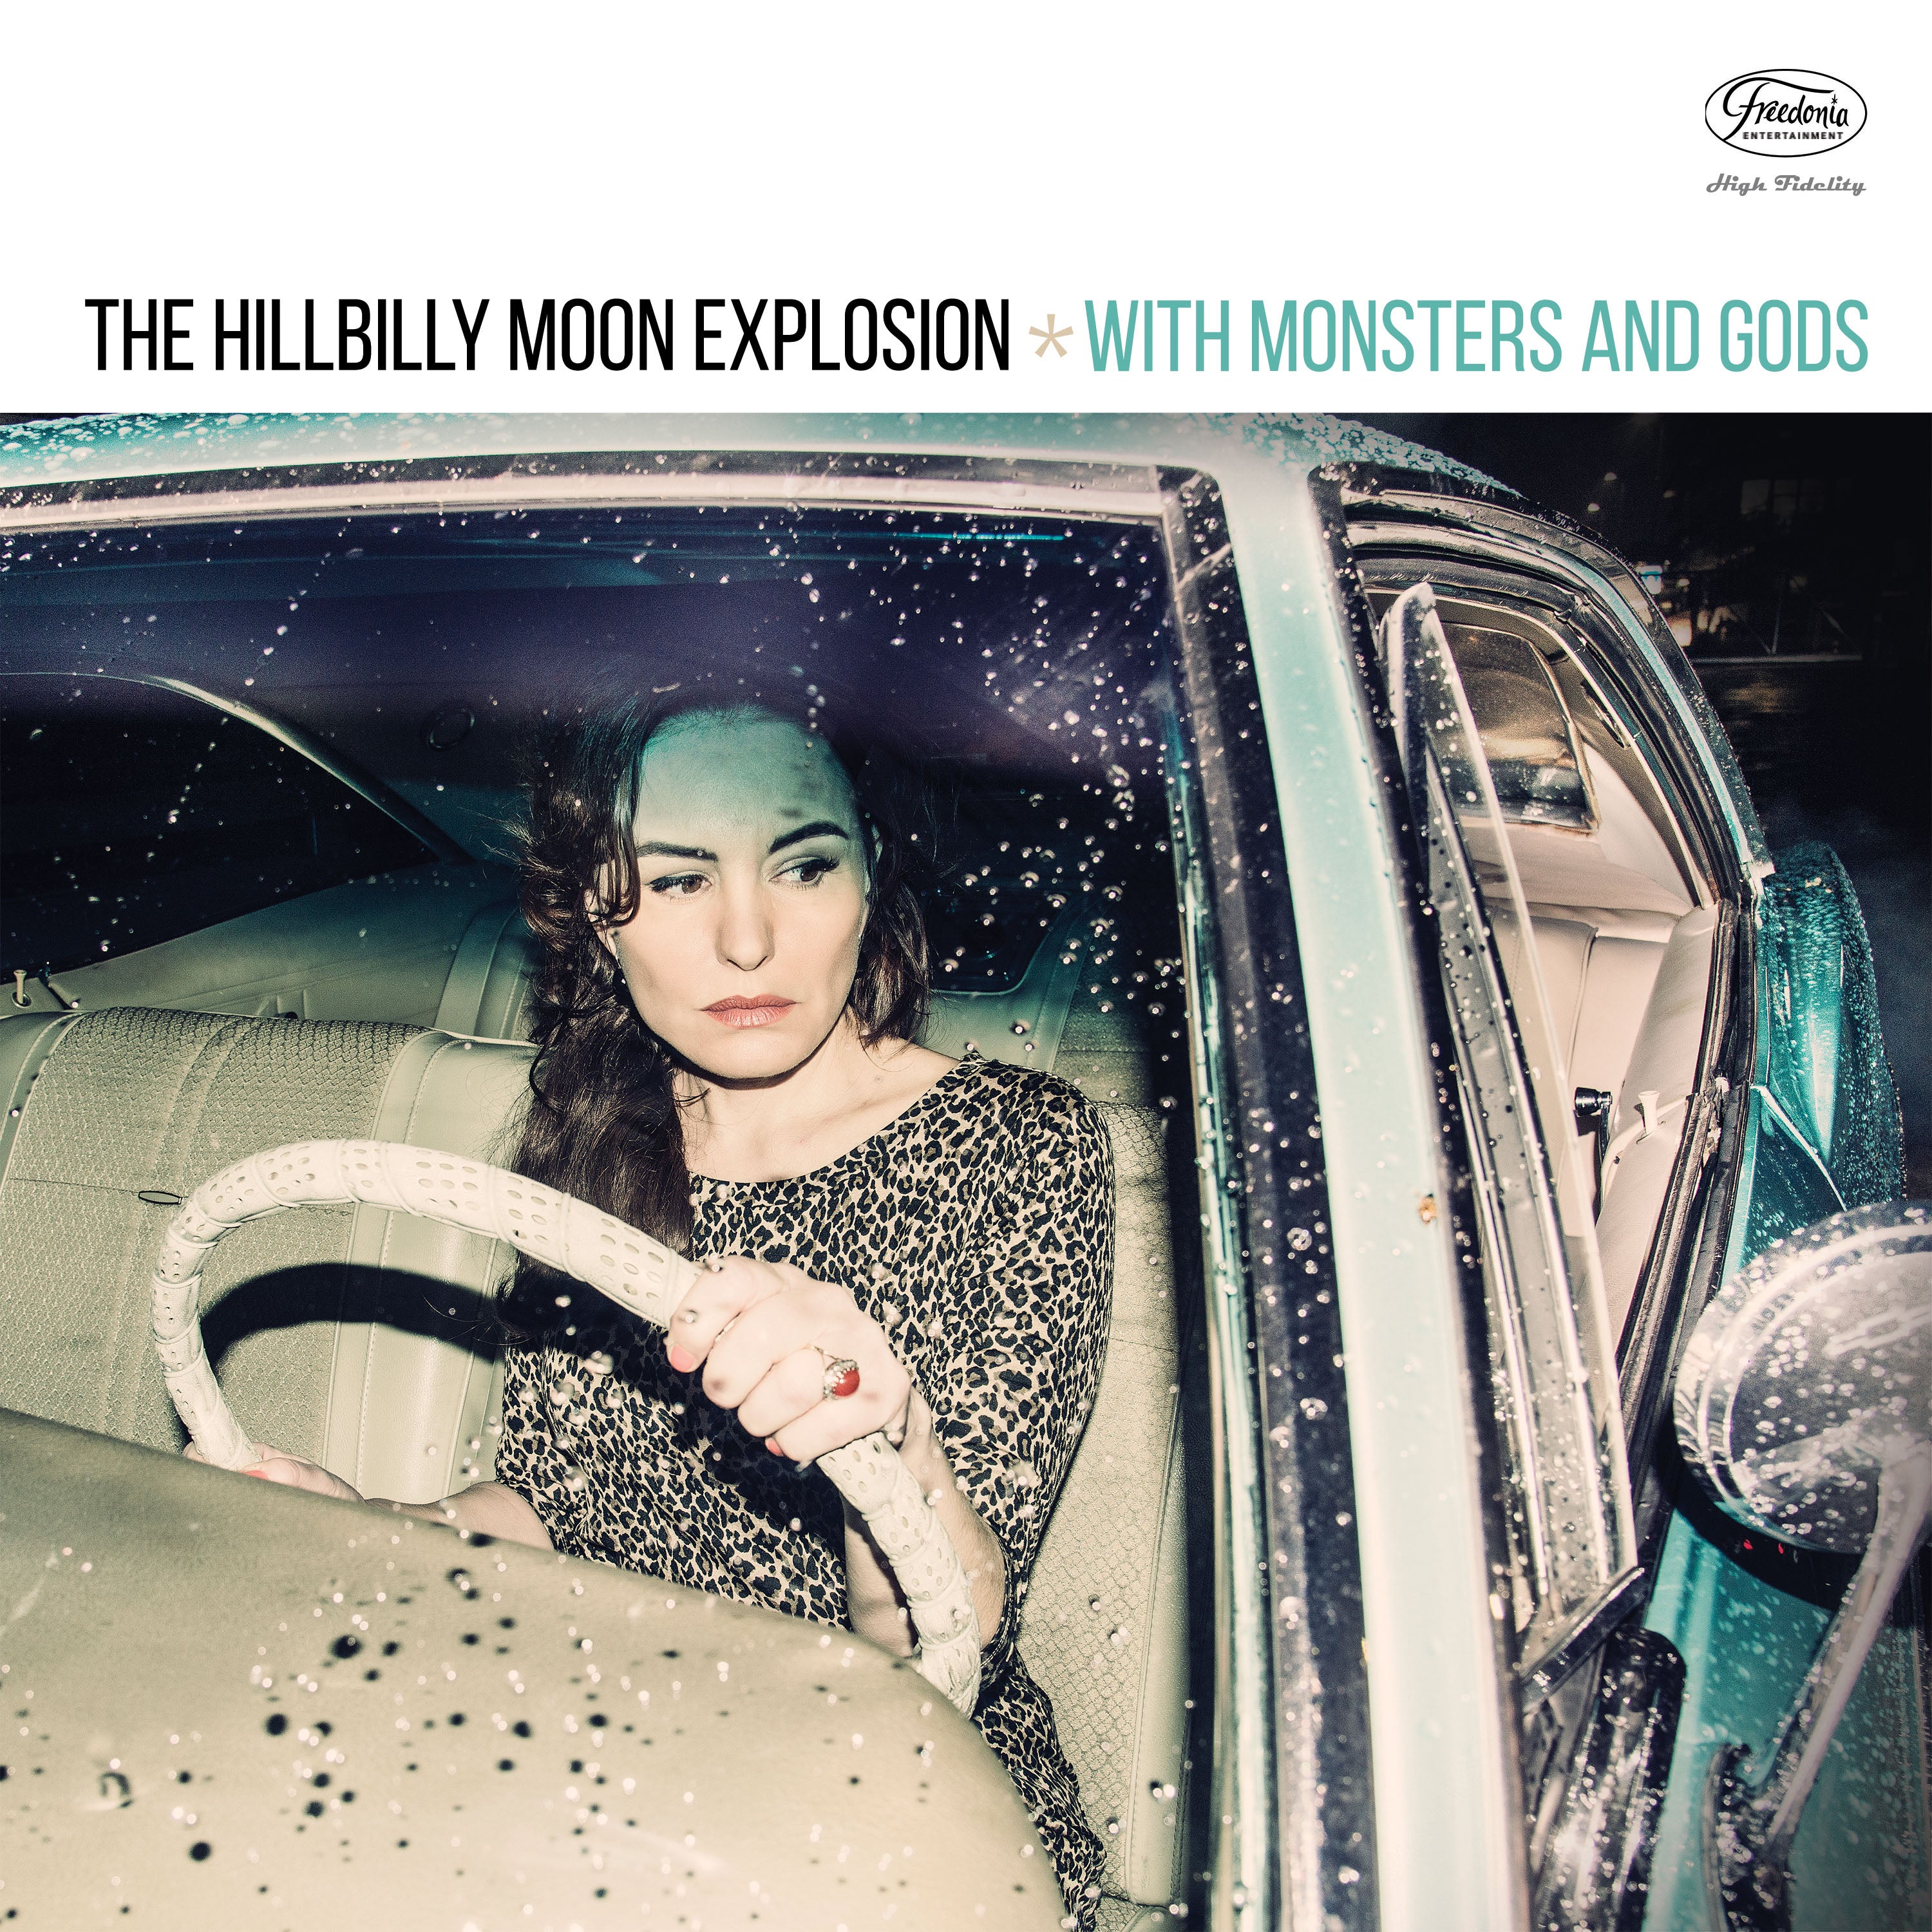 The Hillibilly Moon Explosion - With Monsters & Gods